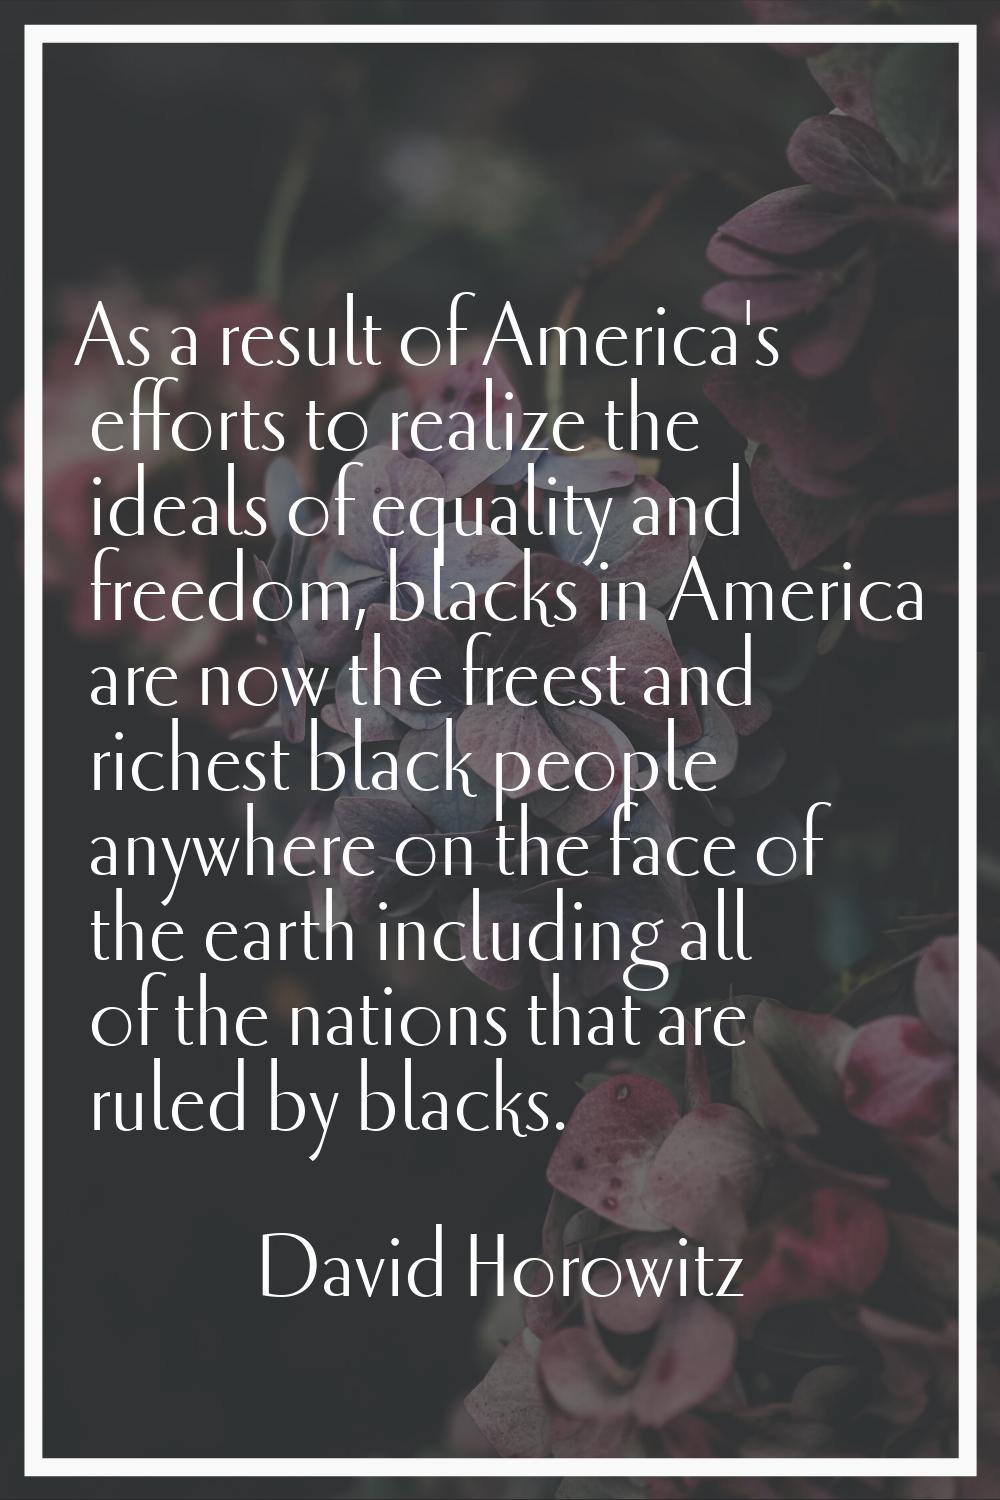 As a result of America's efforts to realize the ideals of equality and freedom, blacks in America a